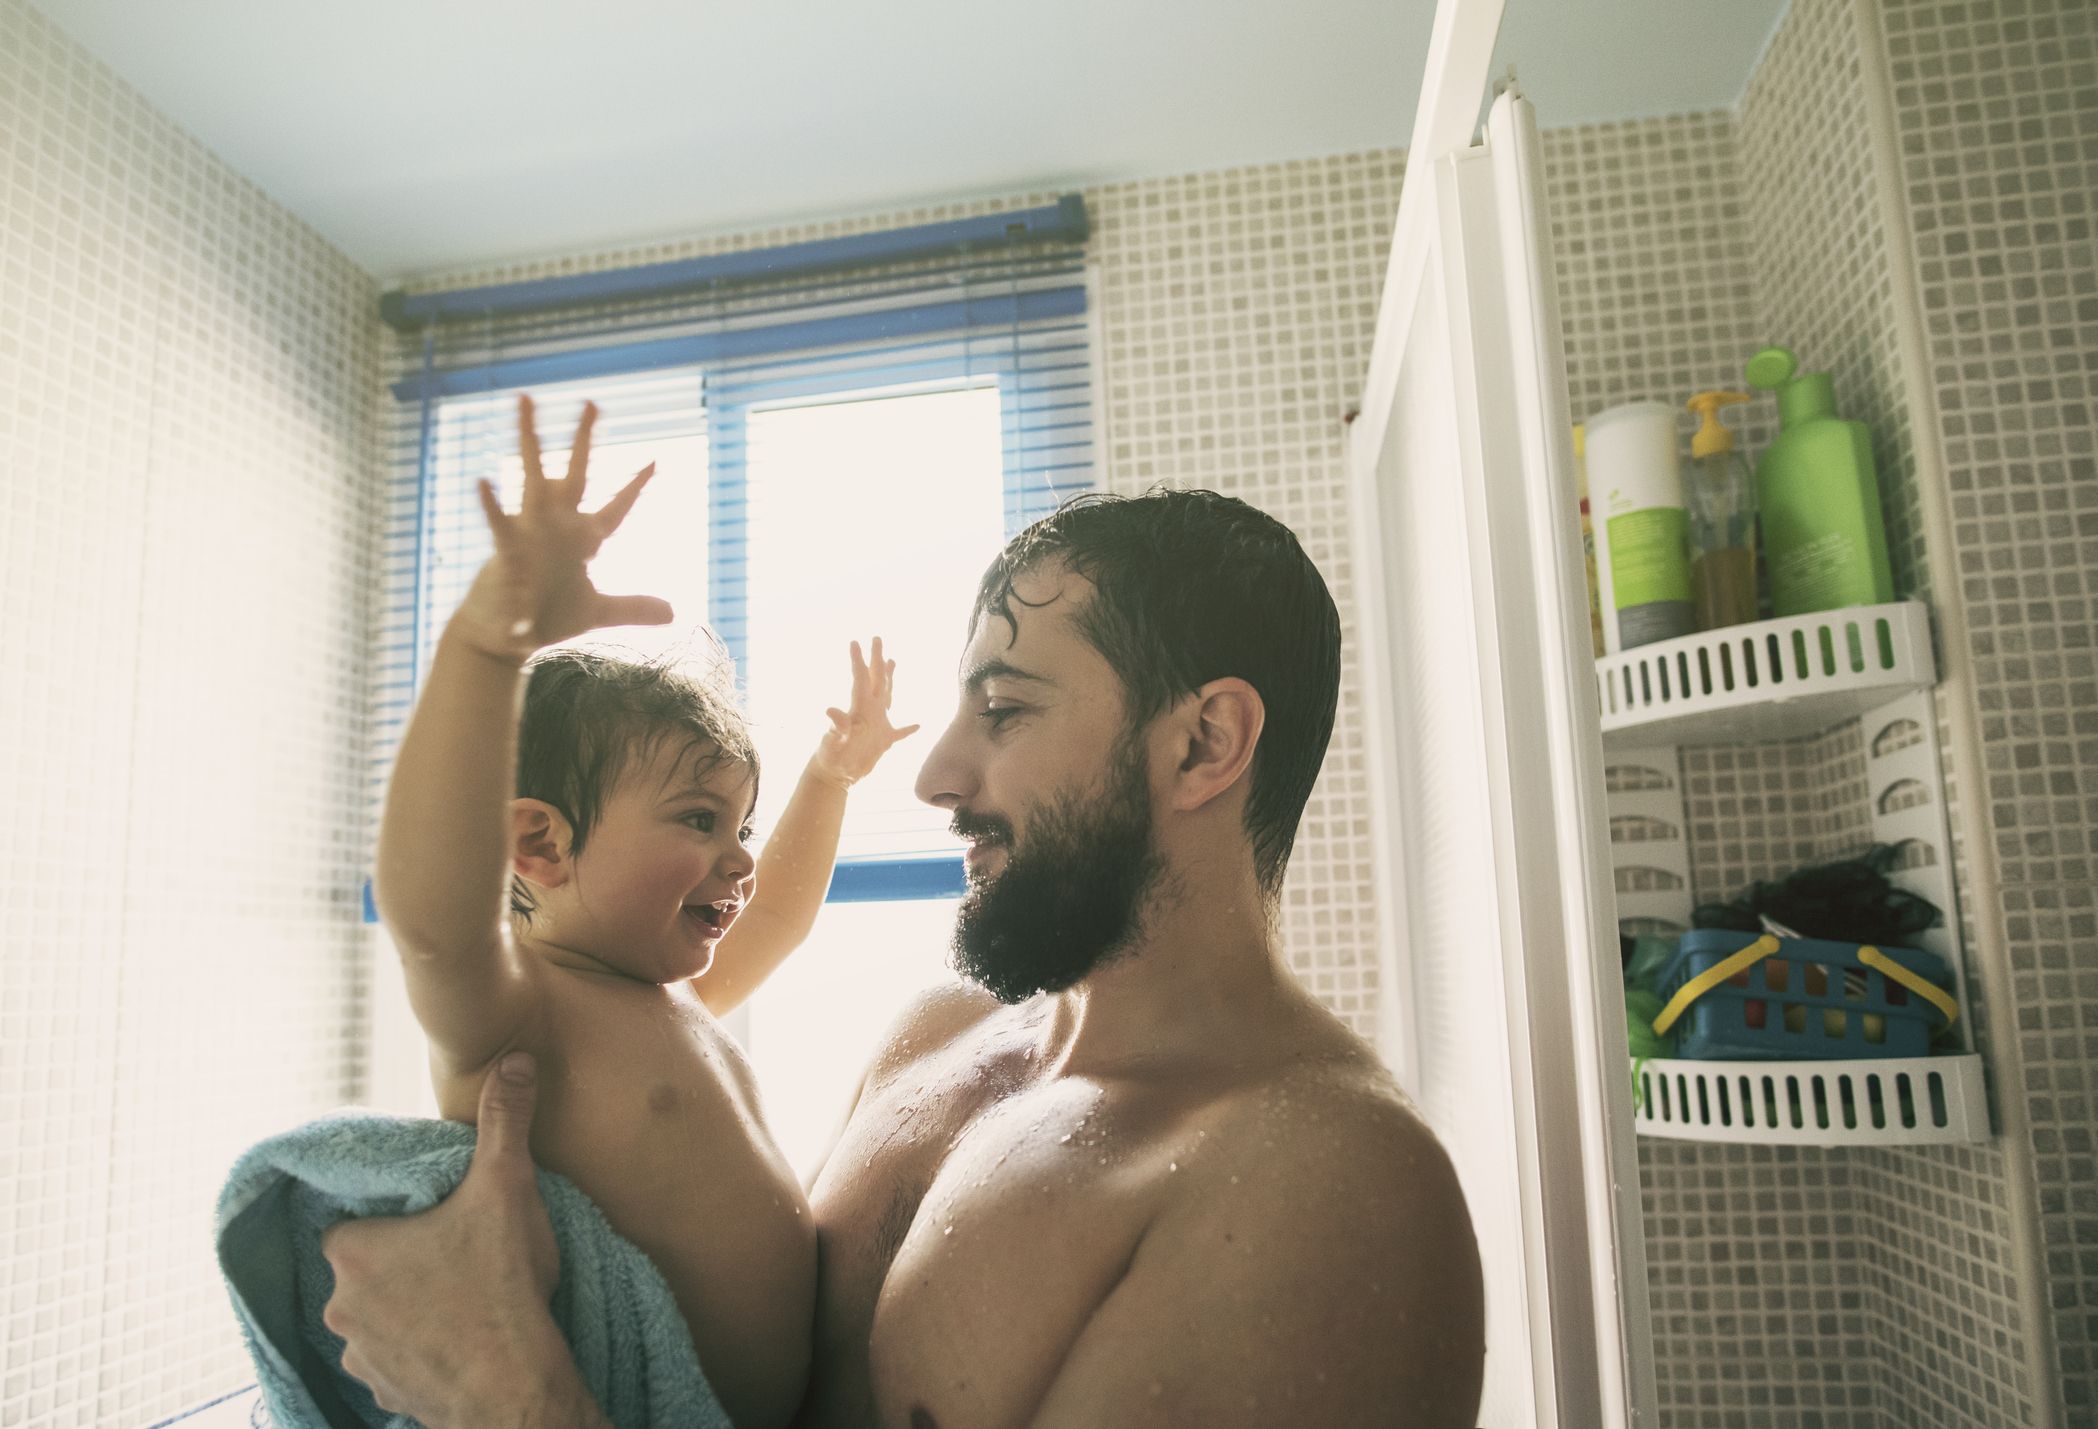 Father Son Morning Wood Showers